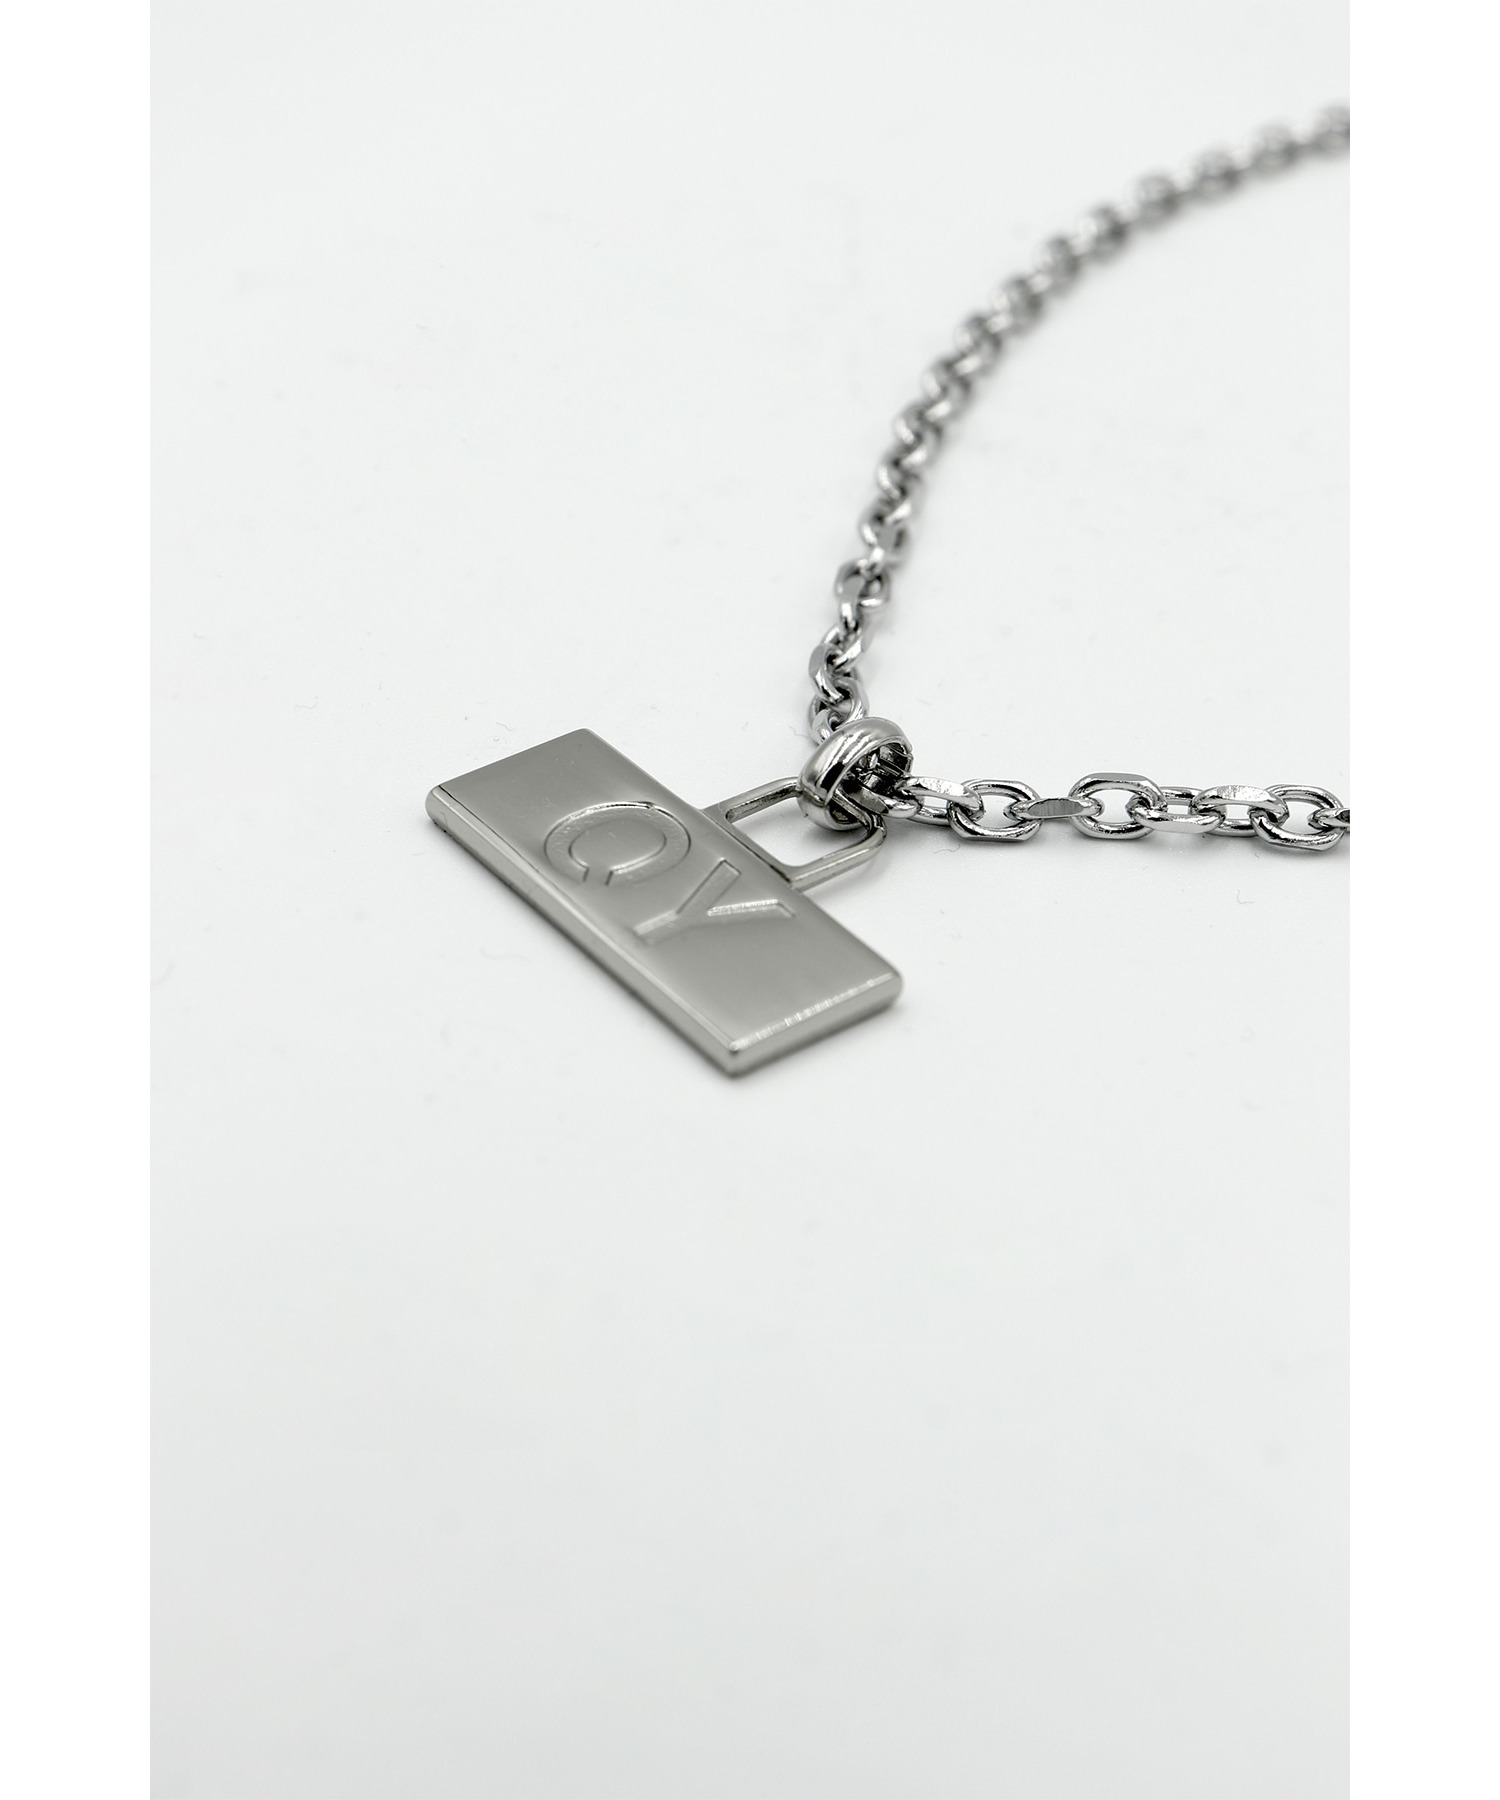 OY/オーワイ』SQUARE LOGO NECKLACE/スクウェアロゴネックレス OY│A 